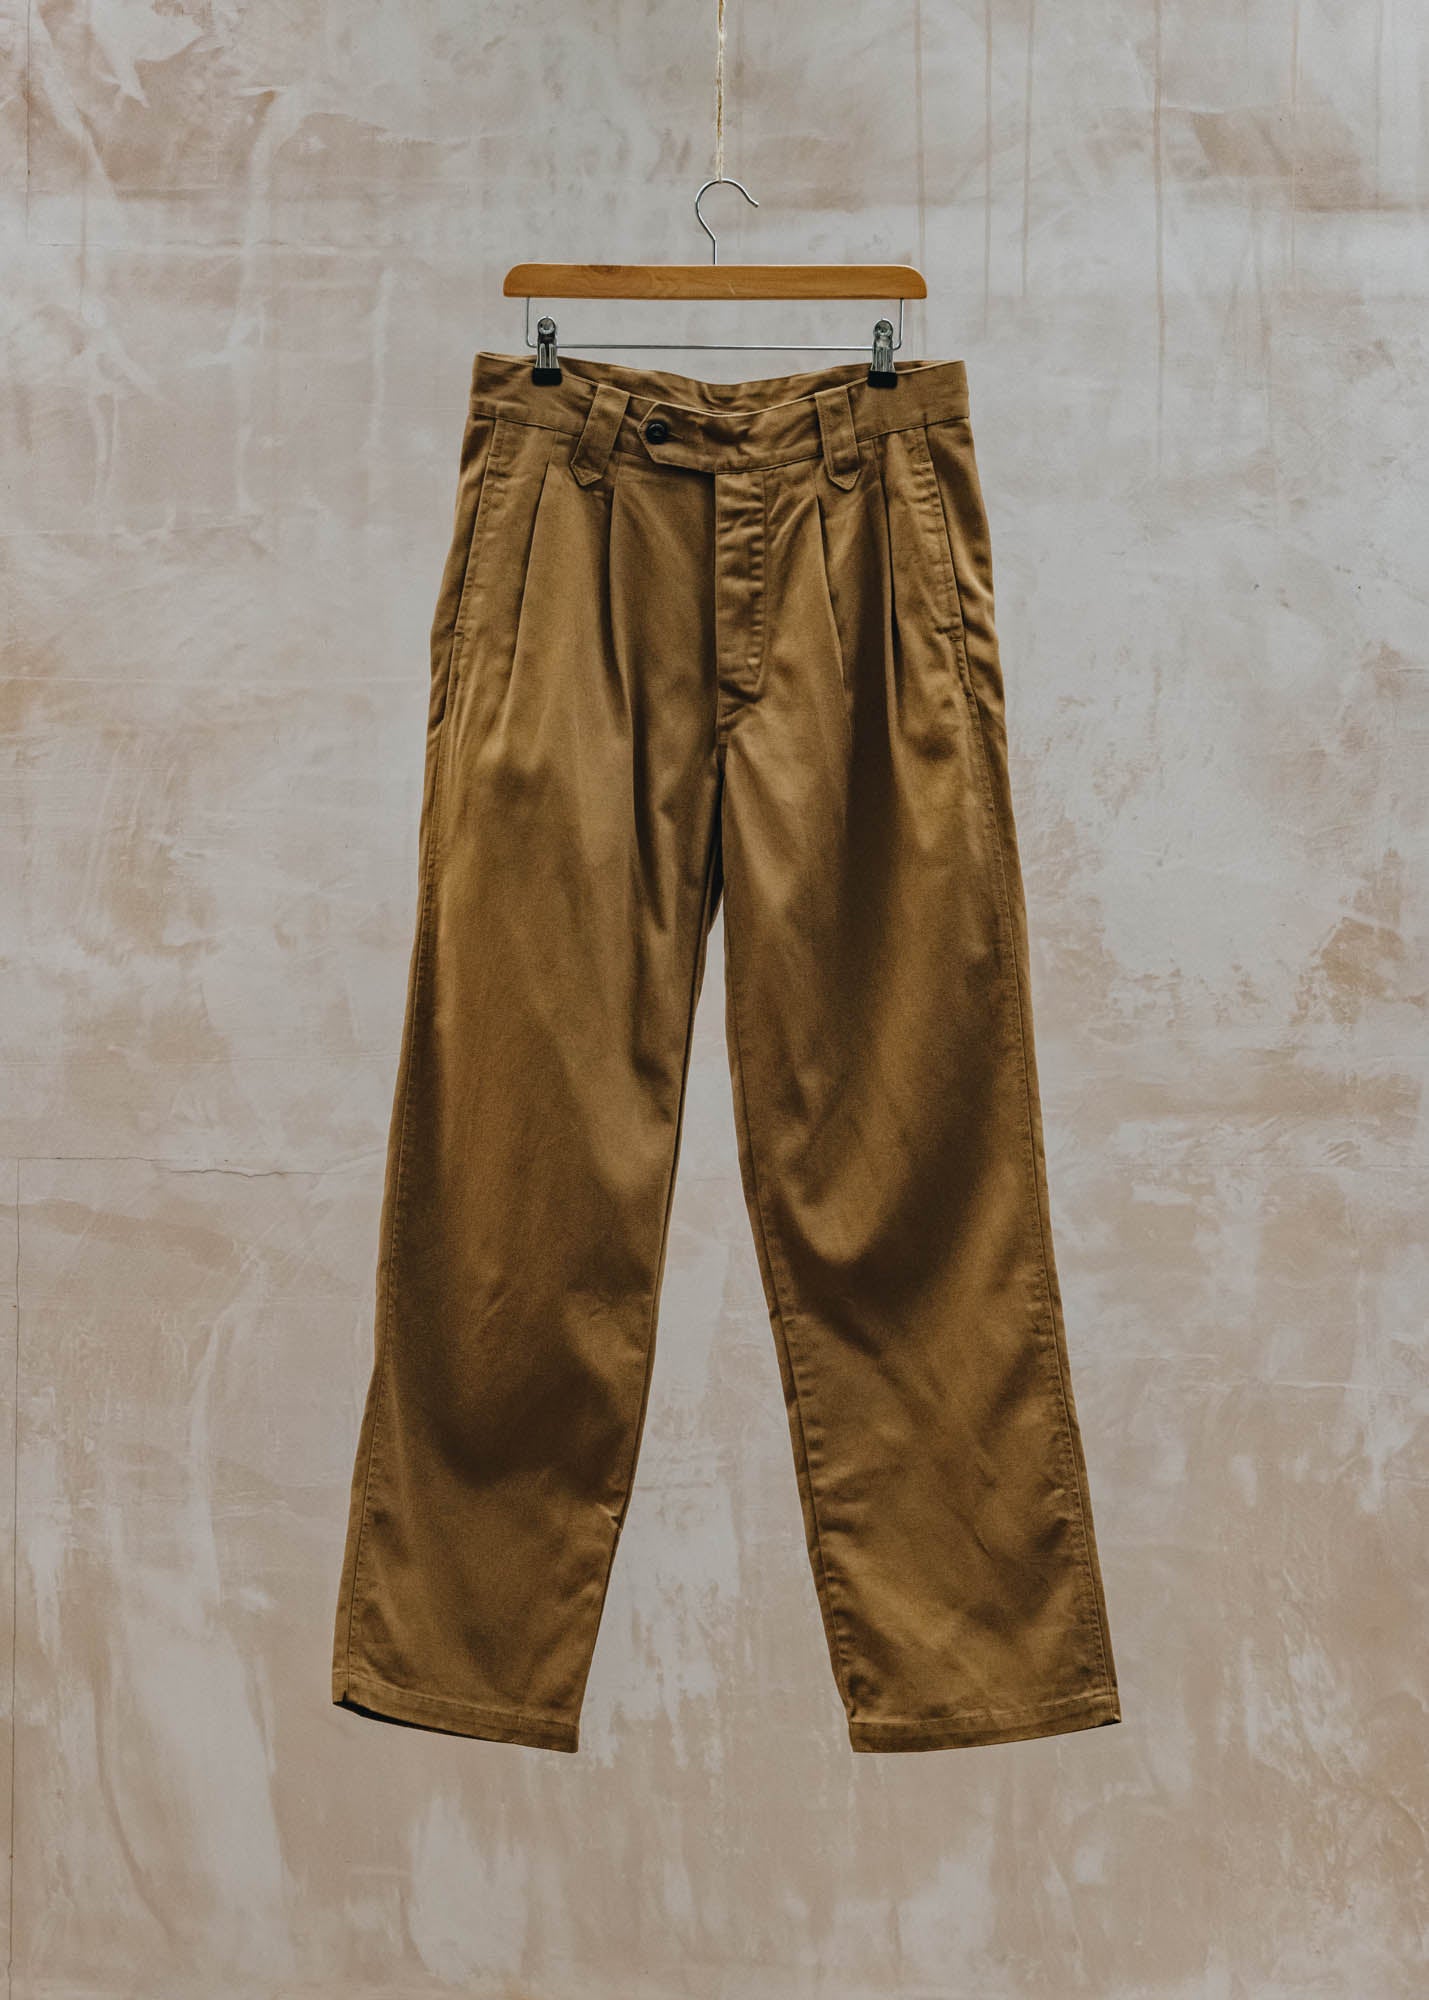 Yarmouth Oilskins Work Trousers in Khaki